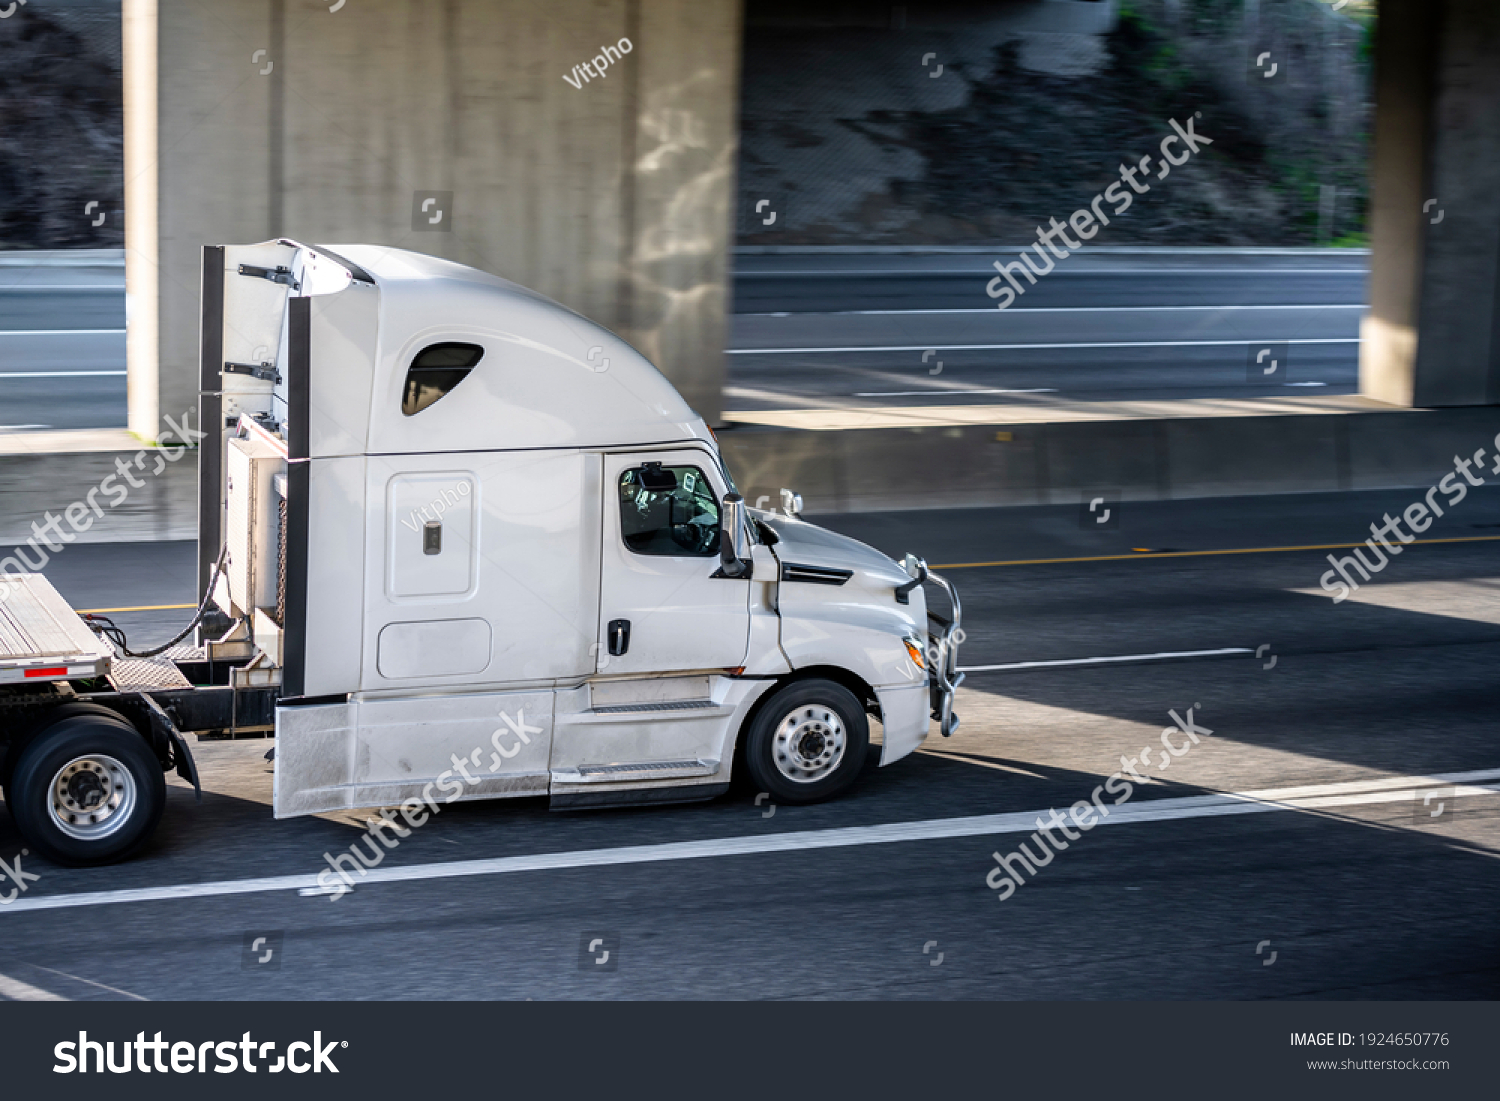 Big rig shiny white semi truck tractor with long cab and auxiliary equipment on the back wall transporting flat bed semi trailer driving on the highway road under the concrete bridge #1924650776